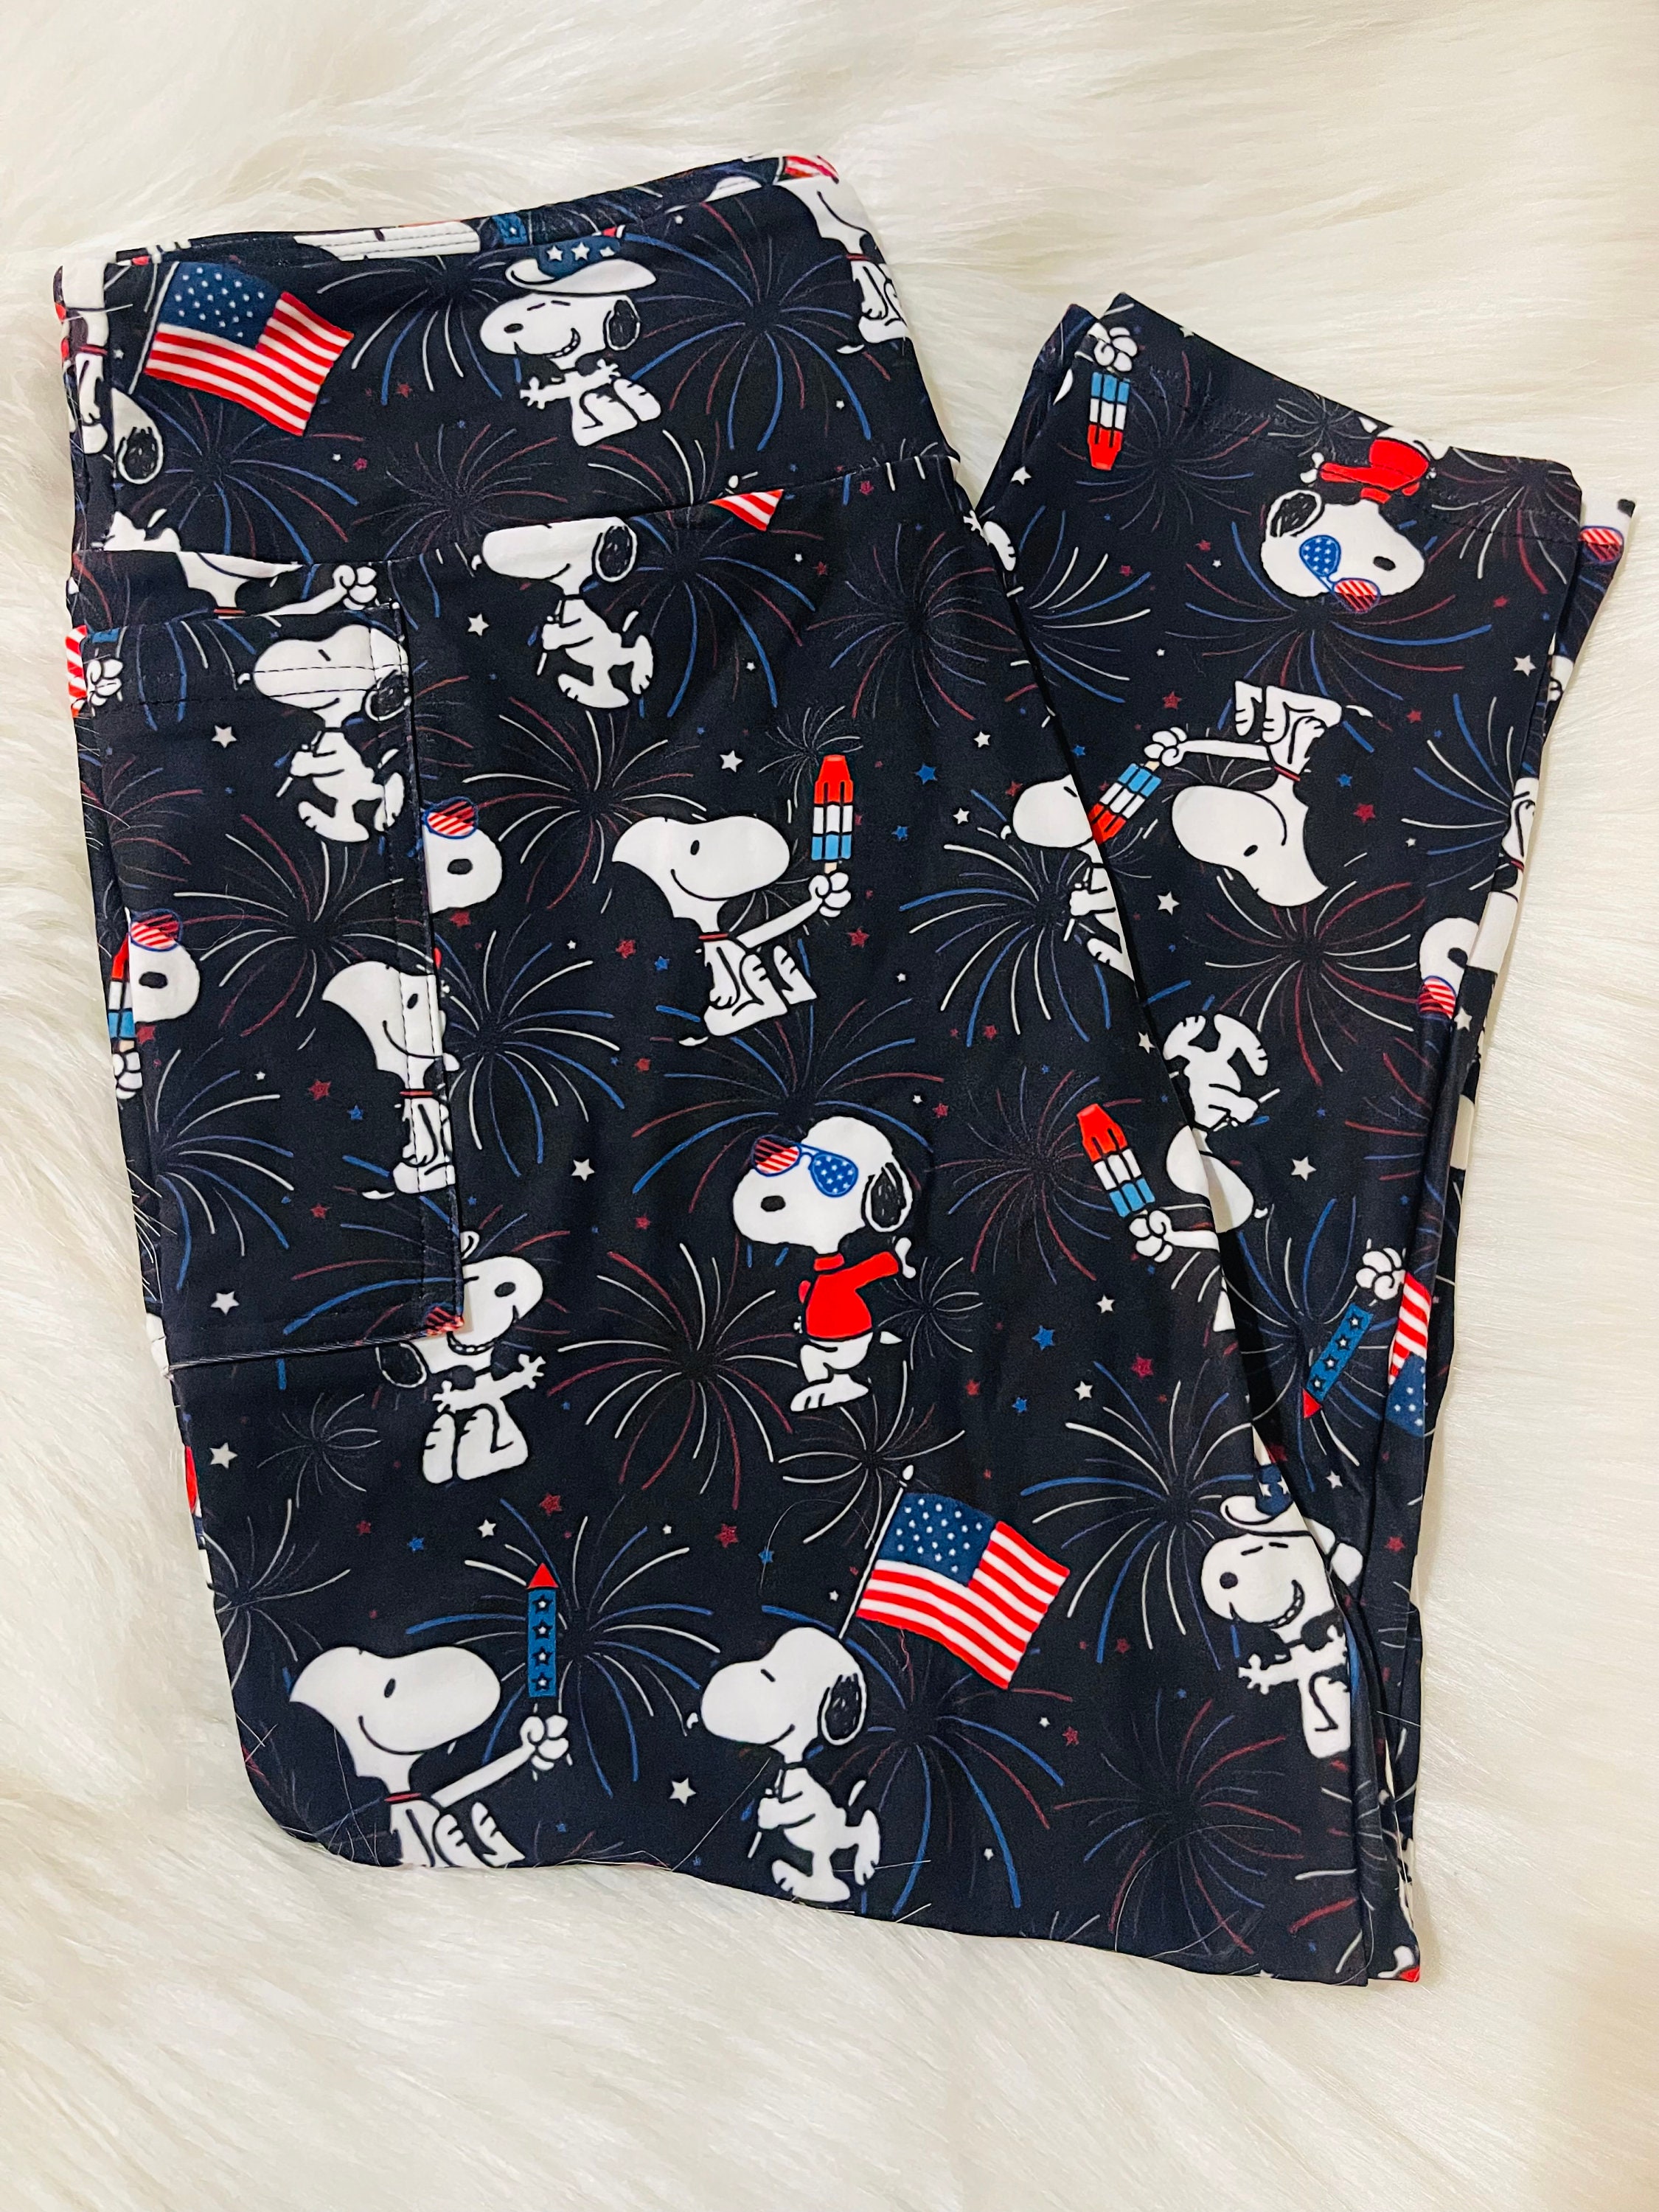 Snoopy Pants -  Canada